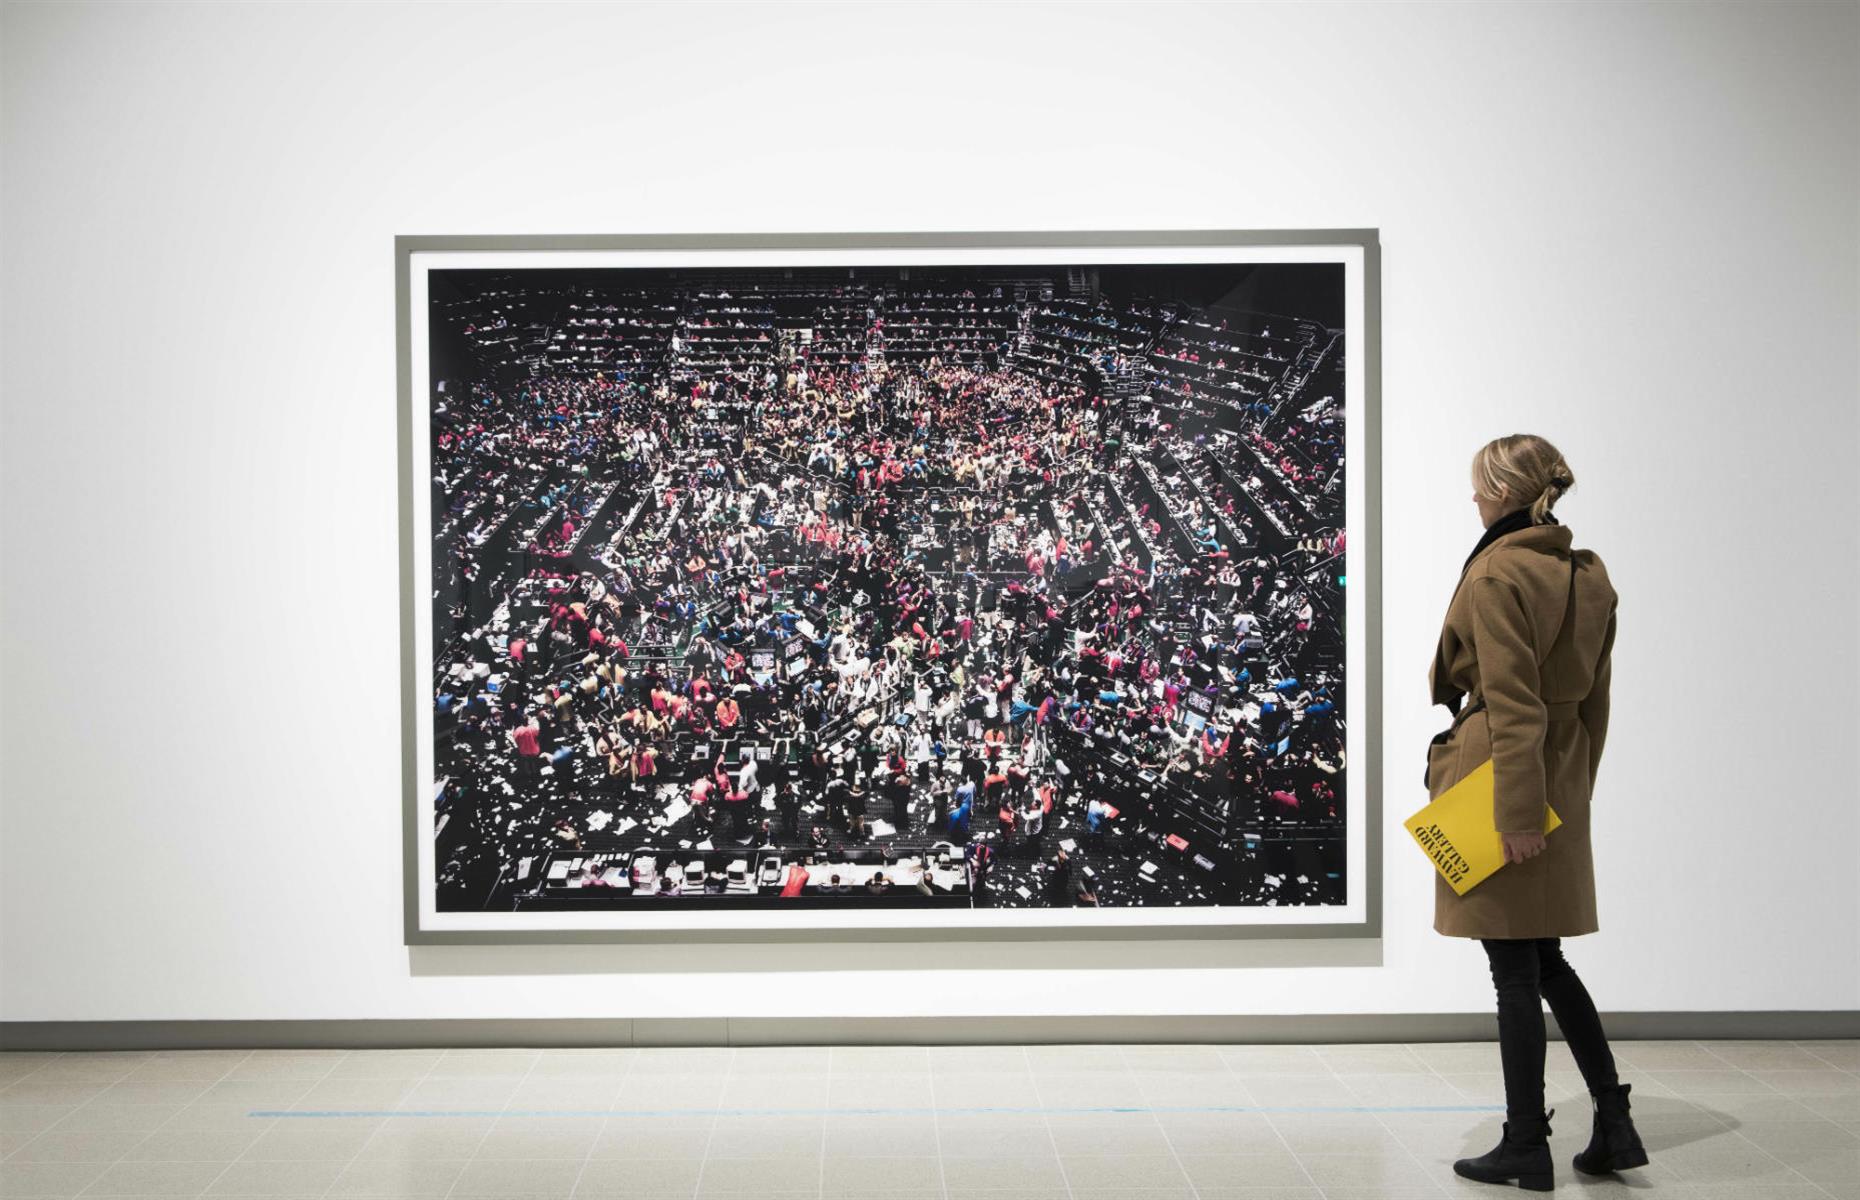 Chicago Board of Trade III, Andreas Gursky: $3.3 million (£2.5m)